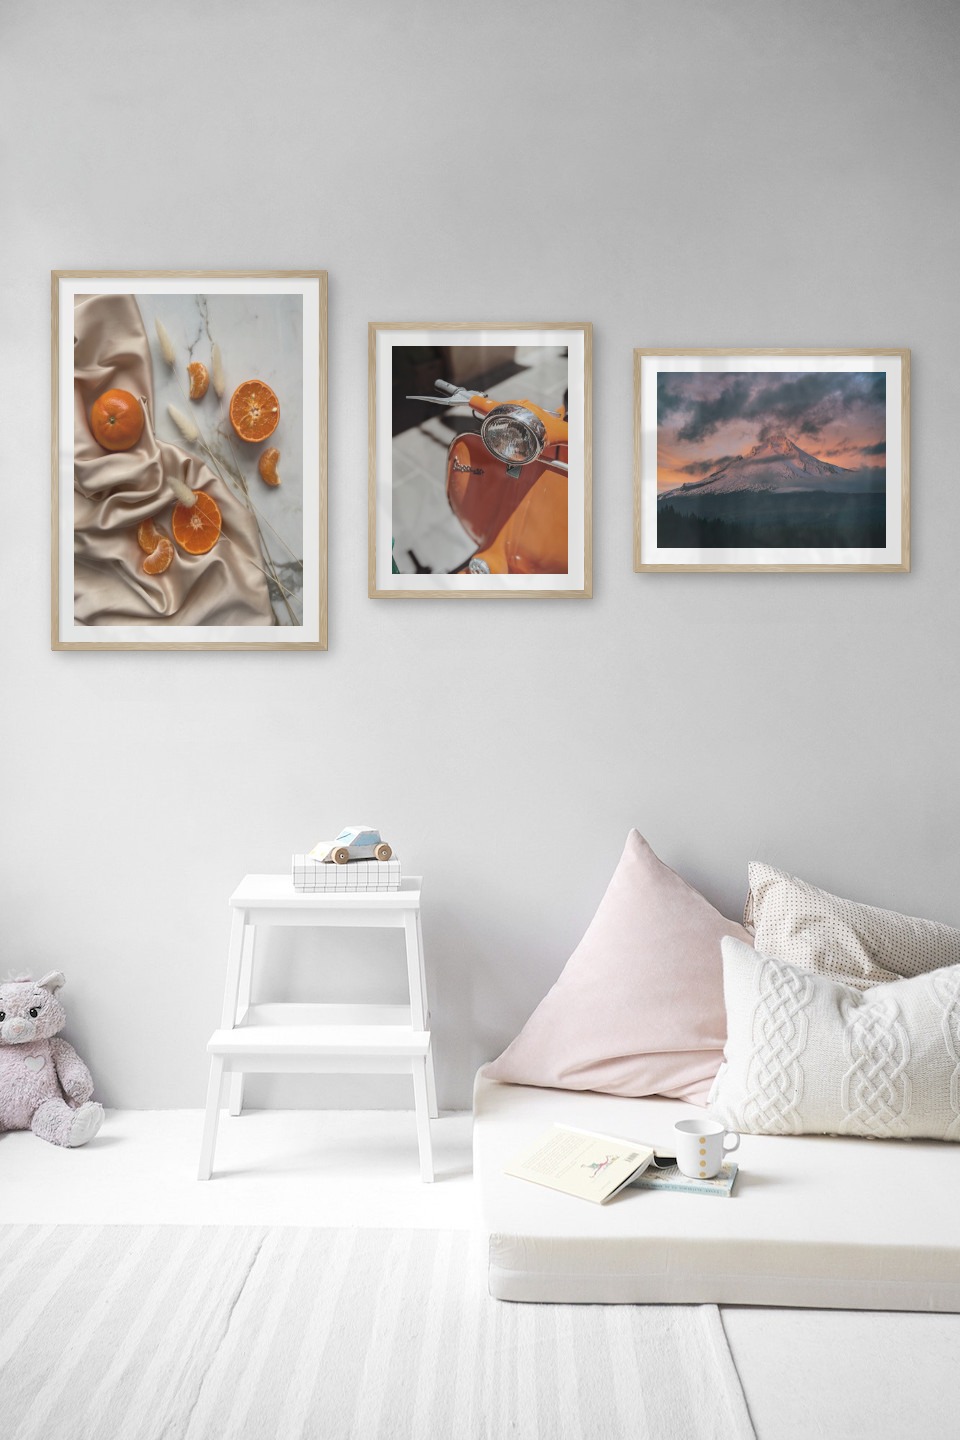 Gallery wall with picture frames in wood in sizes 50x70 and 40x50 with prints "Oranges", "Orange vespa" and "Sunset and mountains"